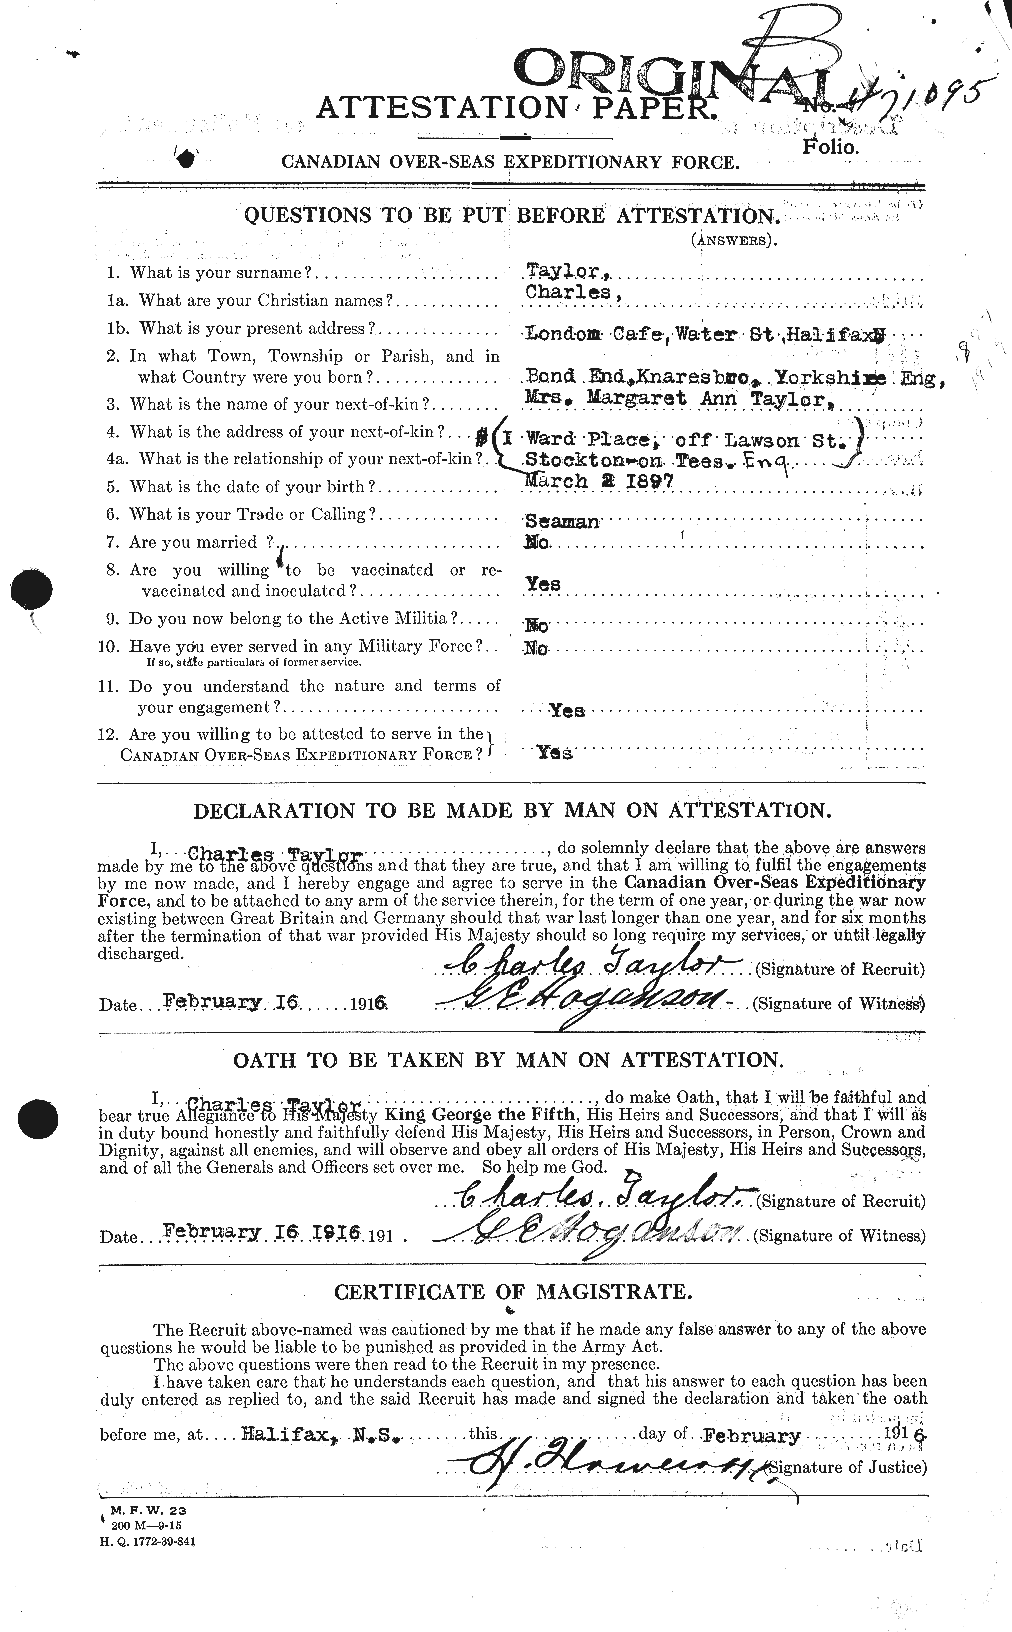 Personnel Records of the First World War - CEF 626800a